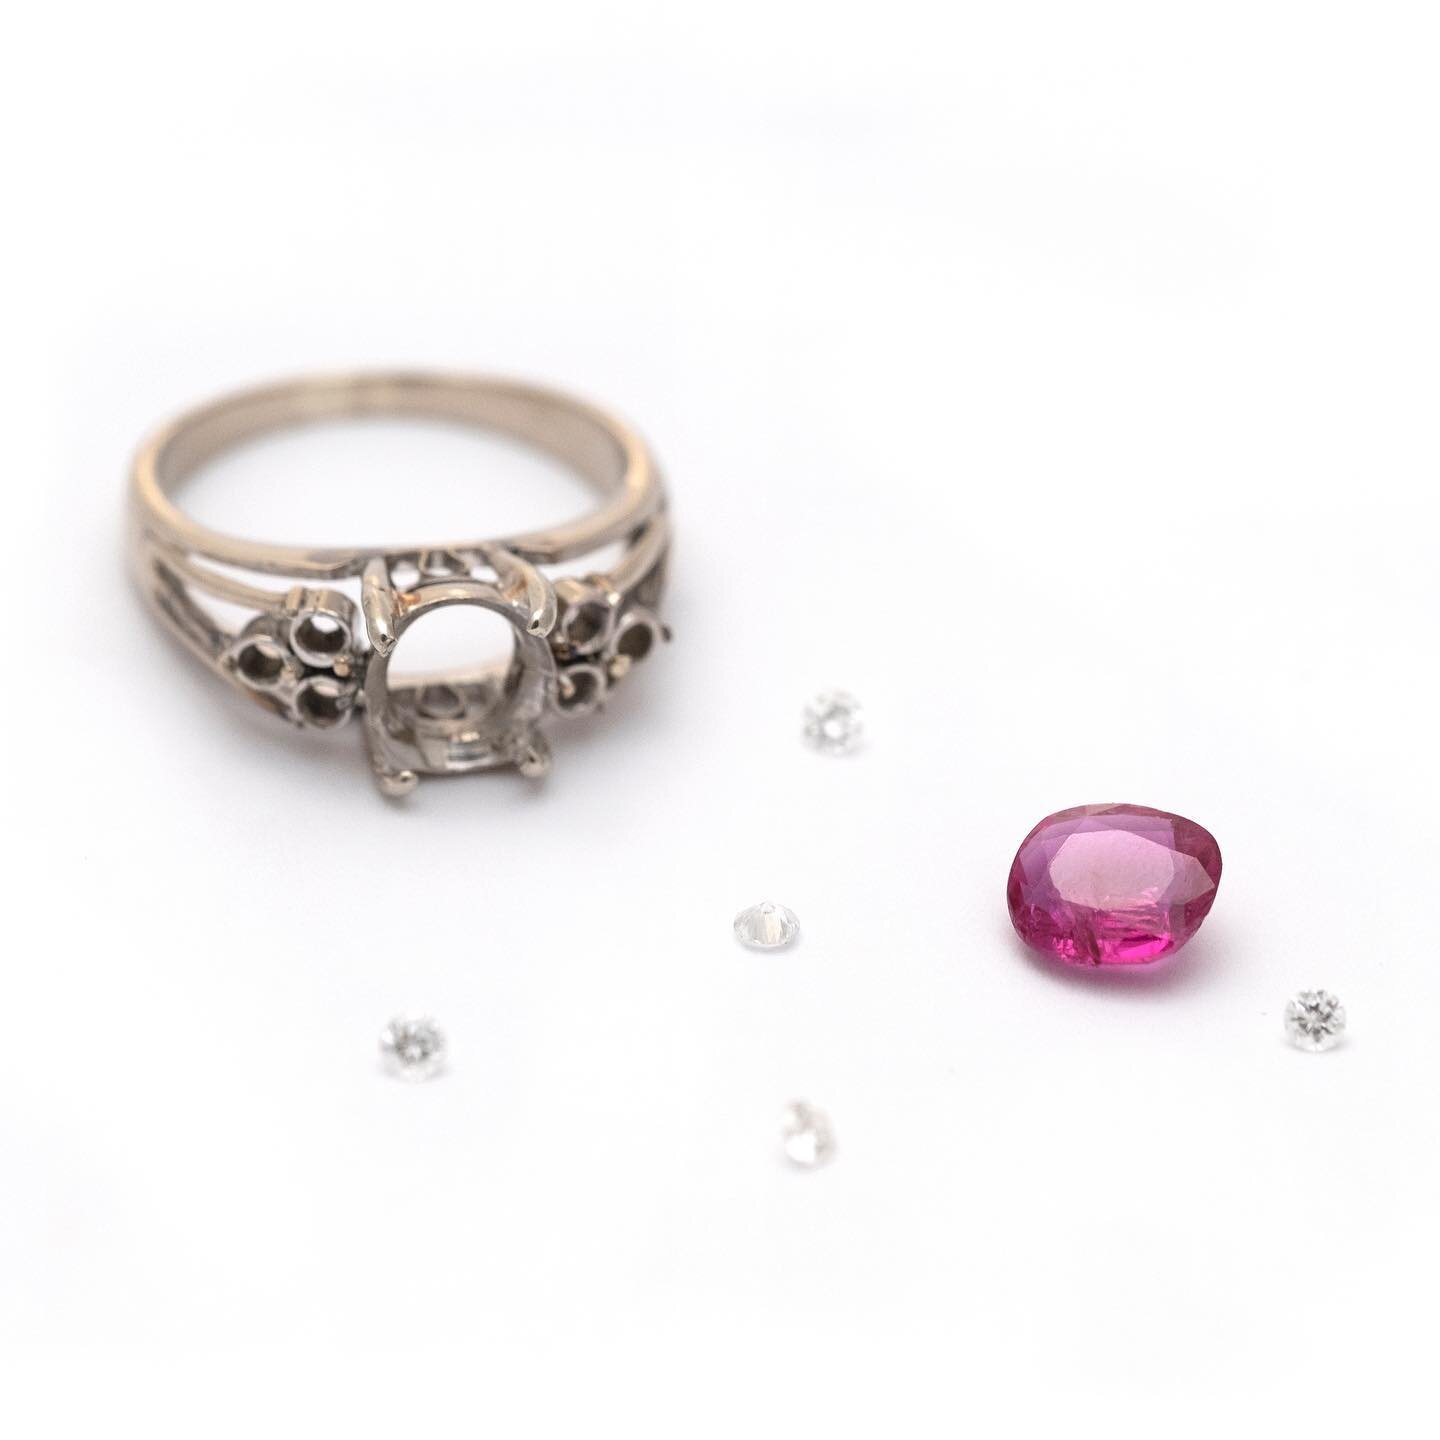 What to do with old and unloved jewelry?
In this case, we popped out the stones, recut the damaged but beautiful ruby, printed out a delicate new design, and reset the stone to show off that glorious color! 
If you have jewels that need reimagining, 